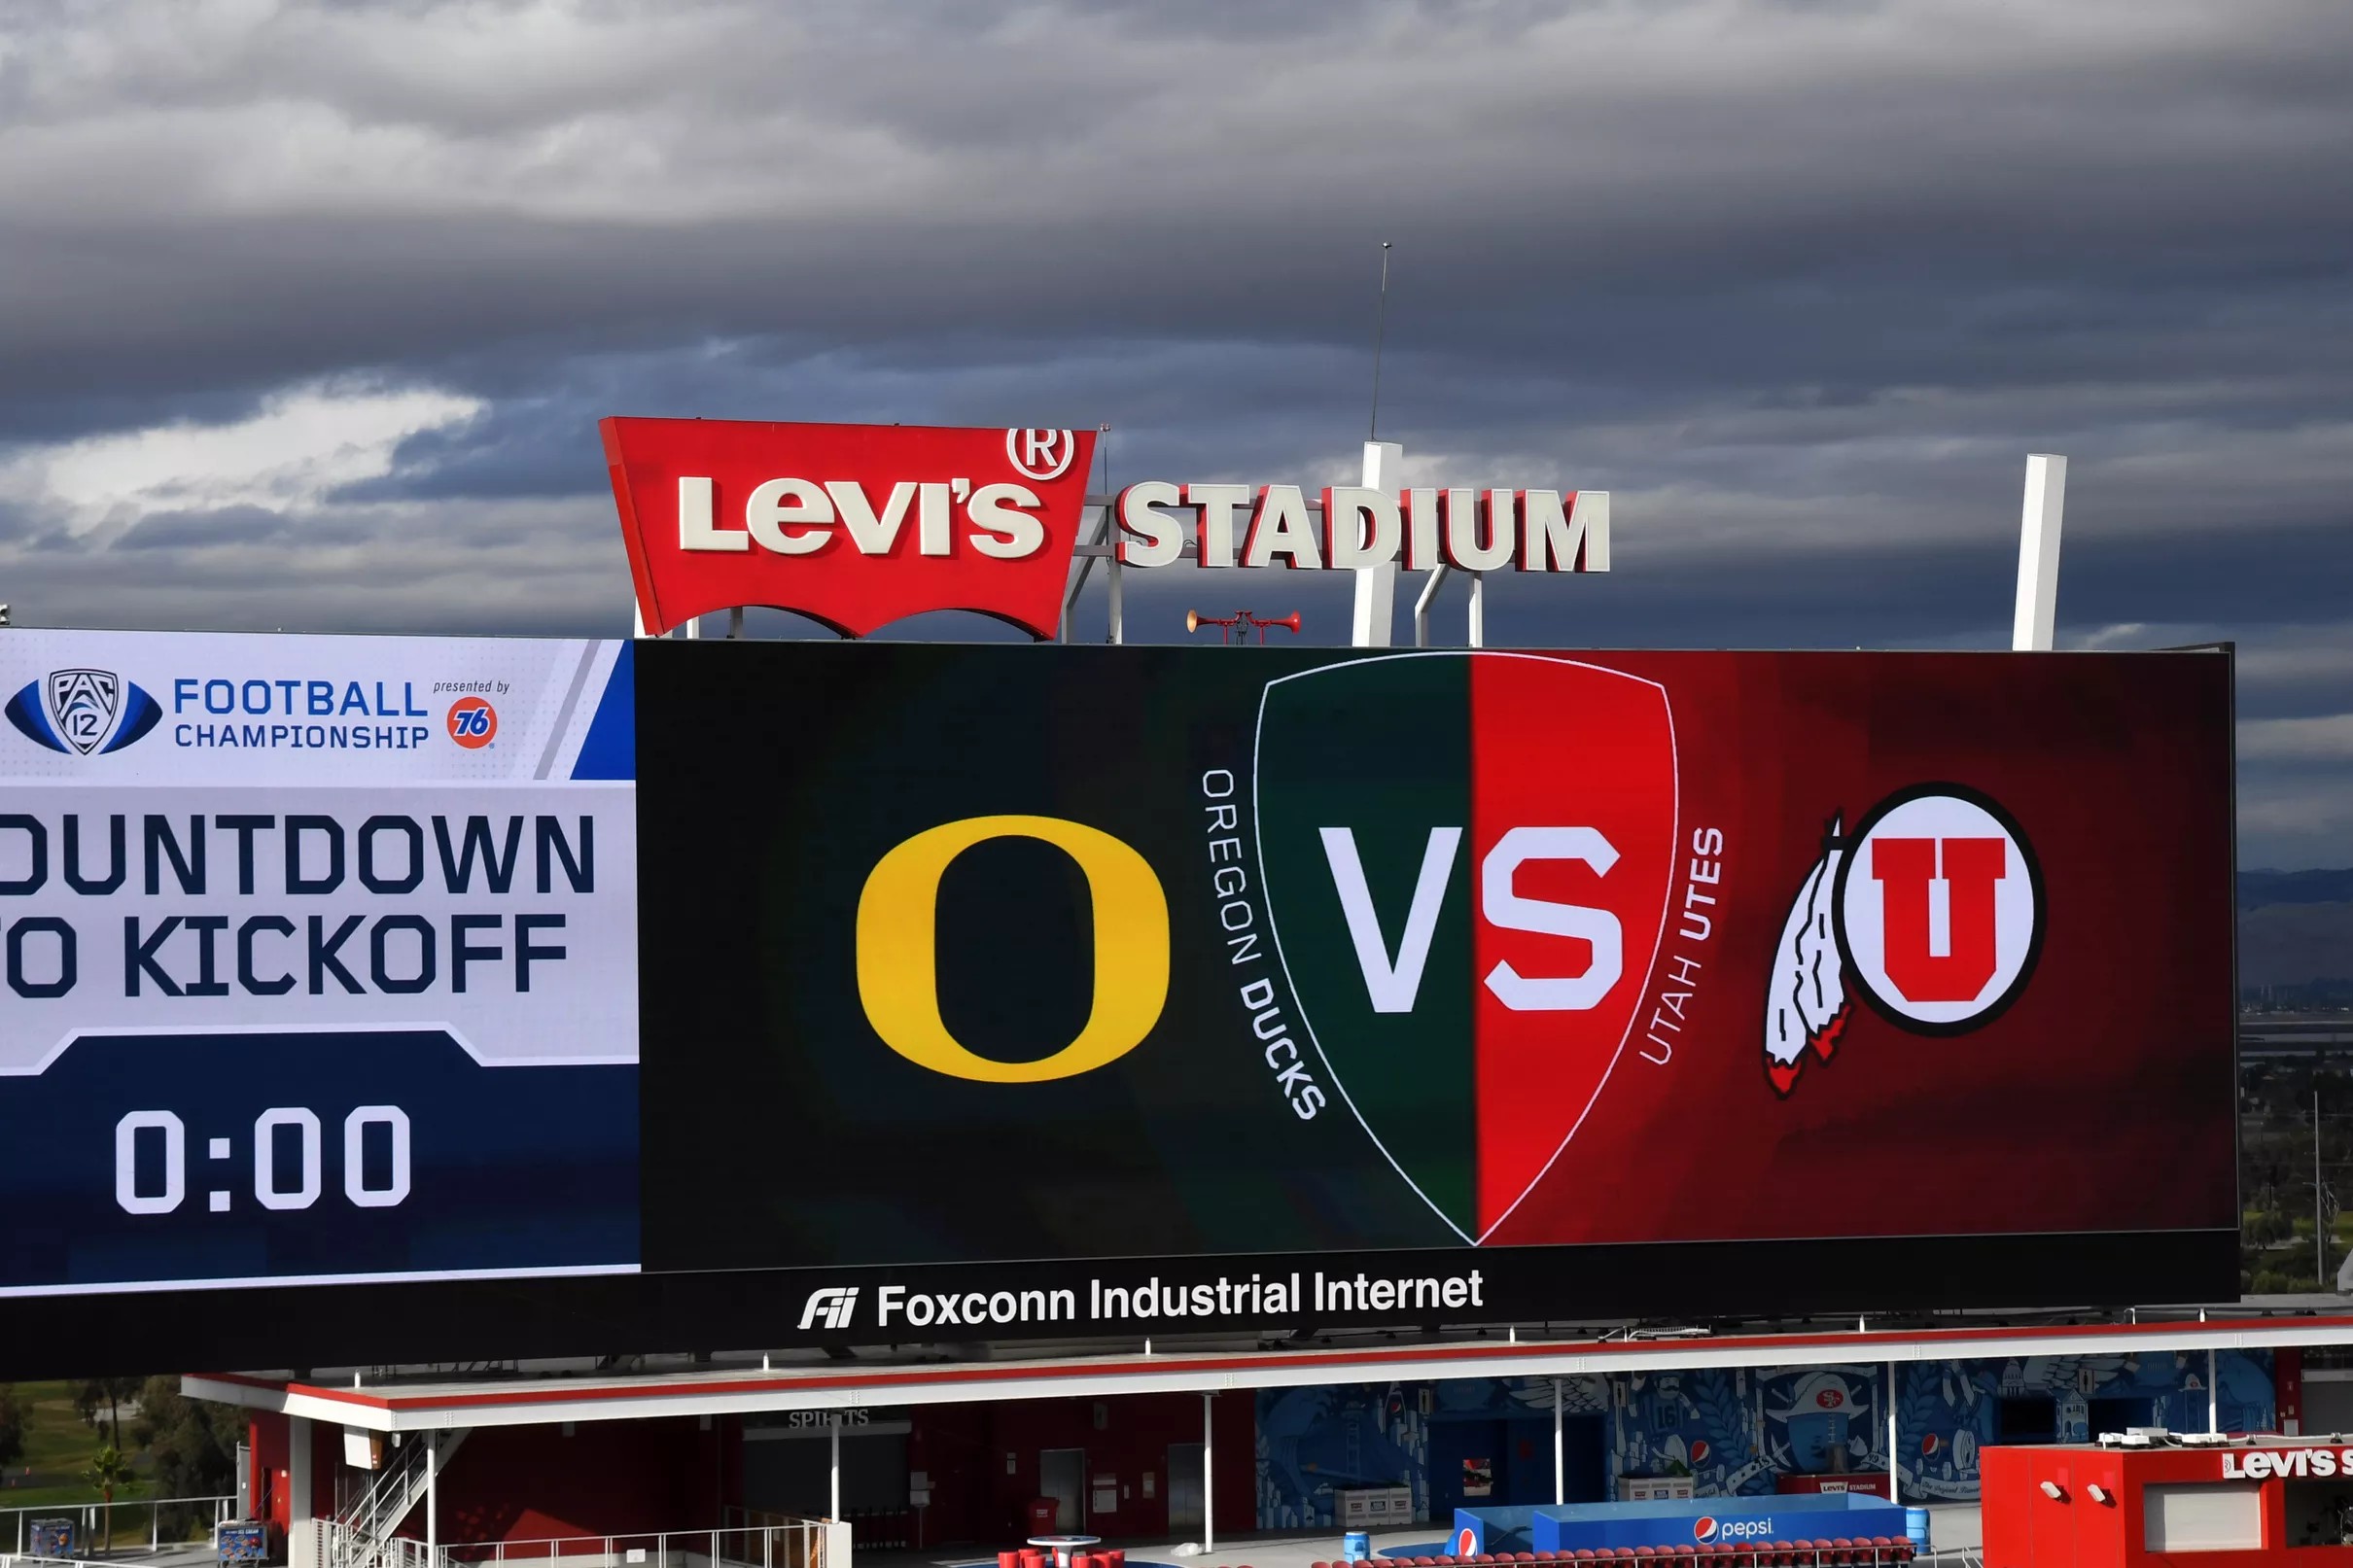 How to Watch the PAC 12 Championship Game